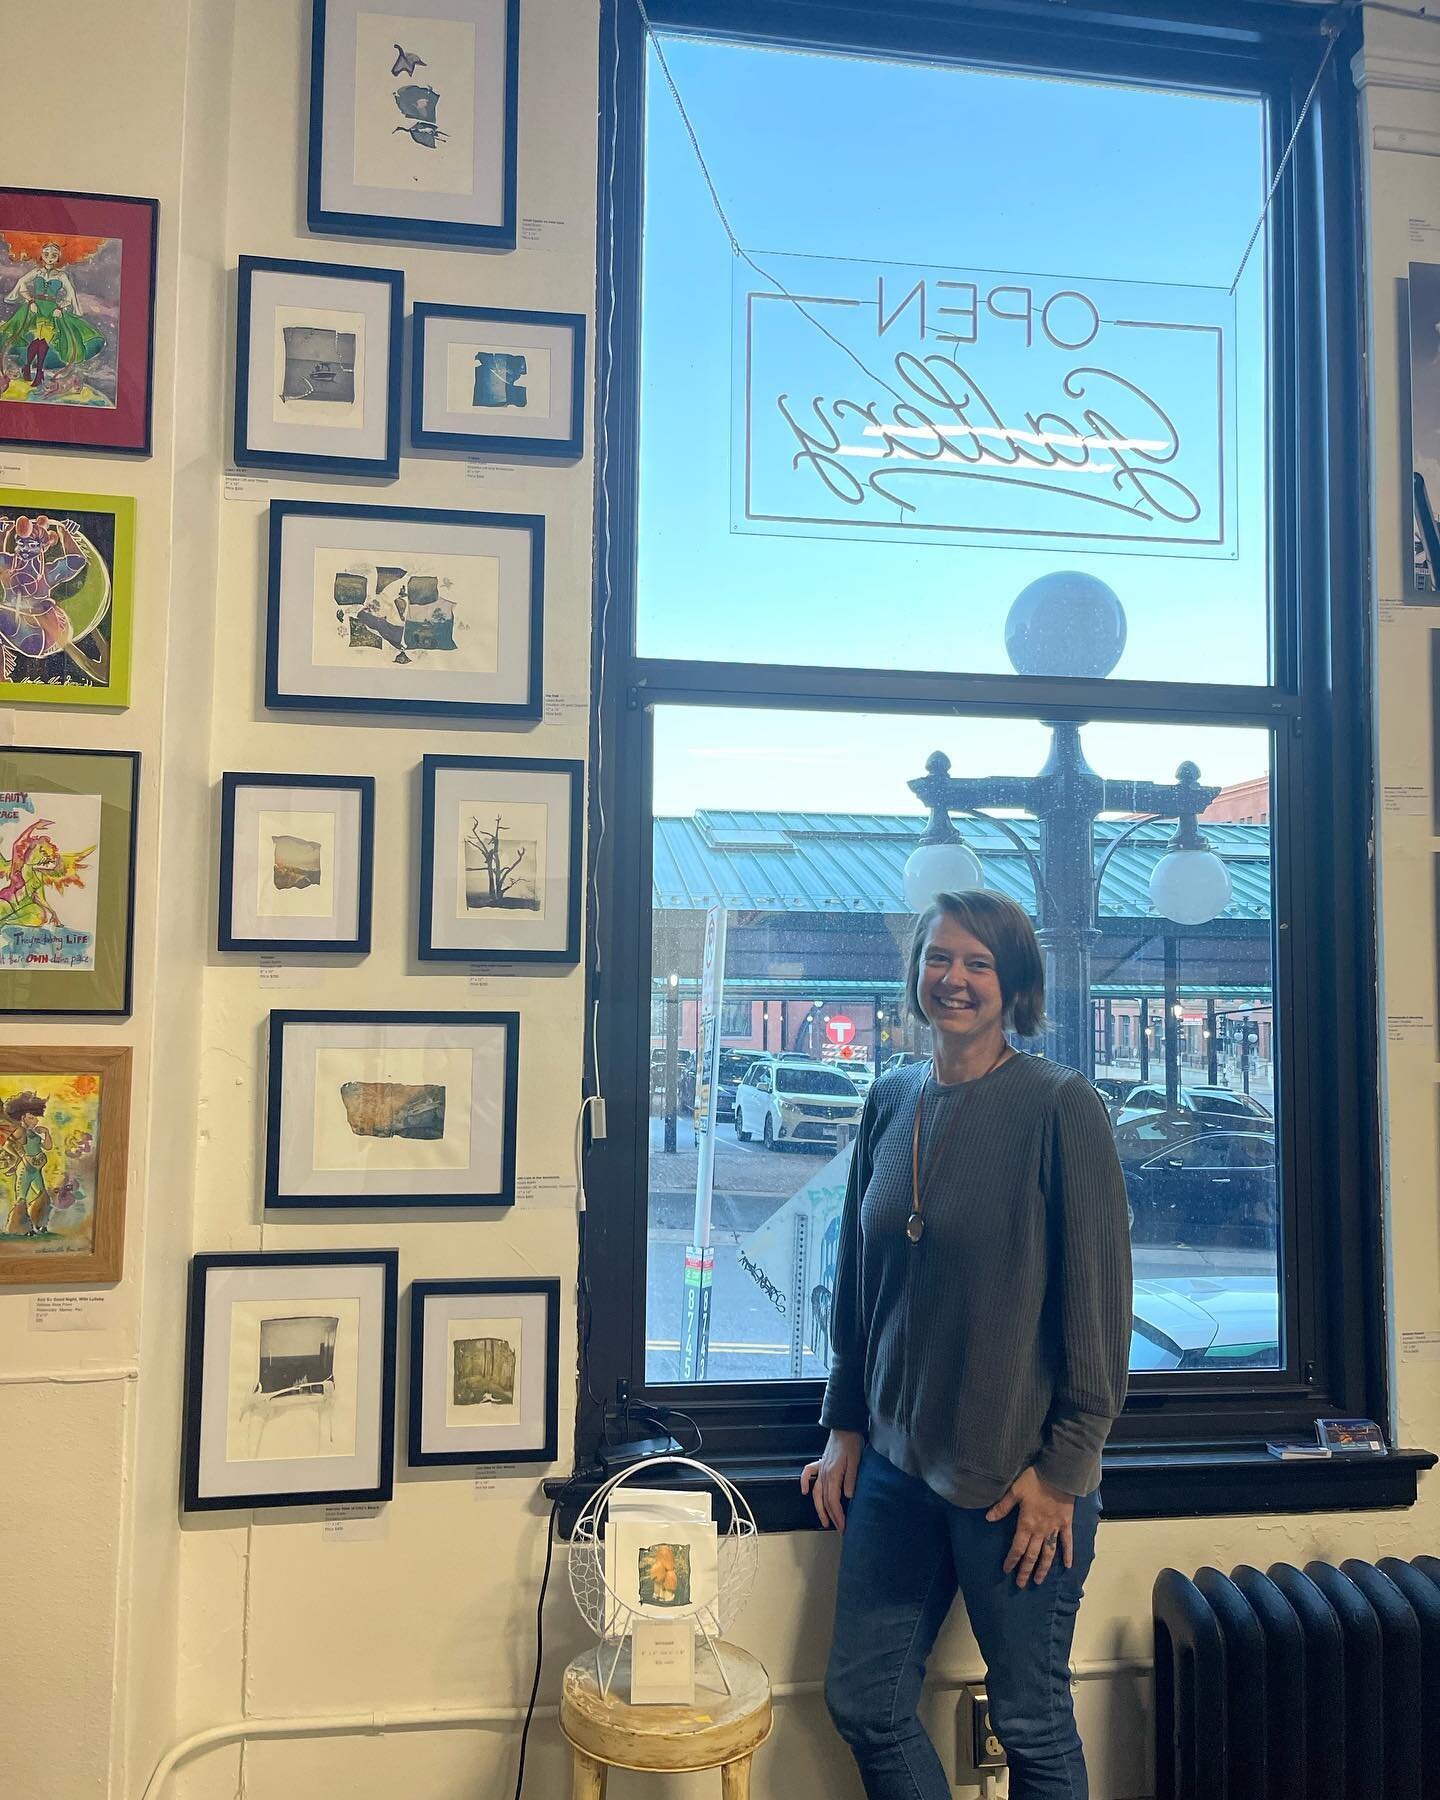 Please welcome Laura Barth to the gallery!  Come see the work this weekend and Friday.

#narrativeart, #contemporaryart, #lowertownarts, #artistsofinstagram,&nbsp; #narrativepainting, #mnart,&nbsp; #artreview, #acrylicpainting, #acrylicink, #intjarti